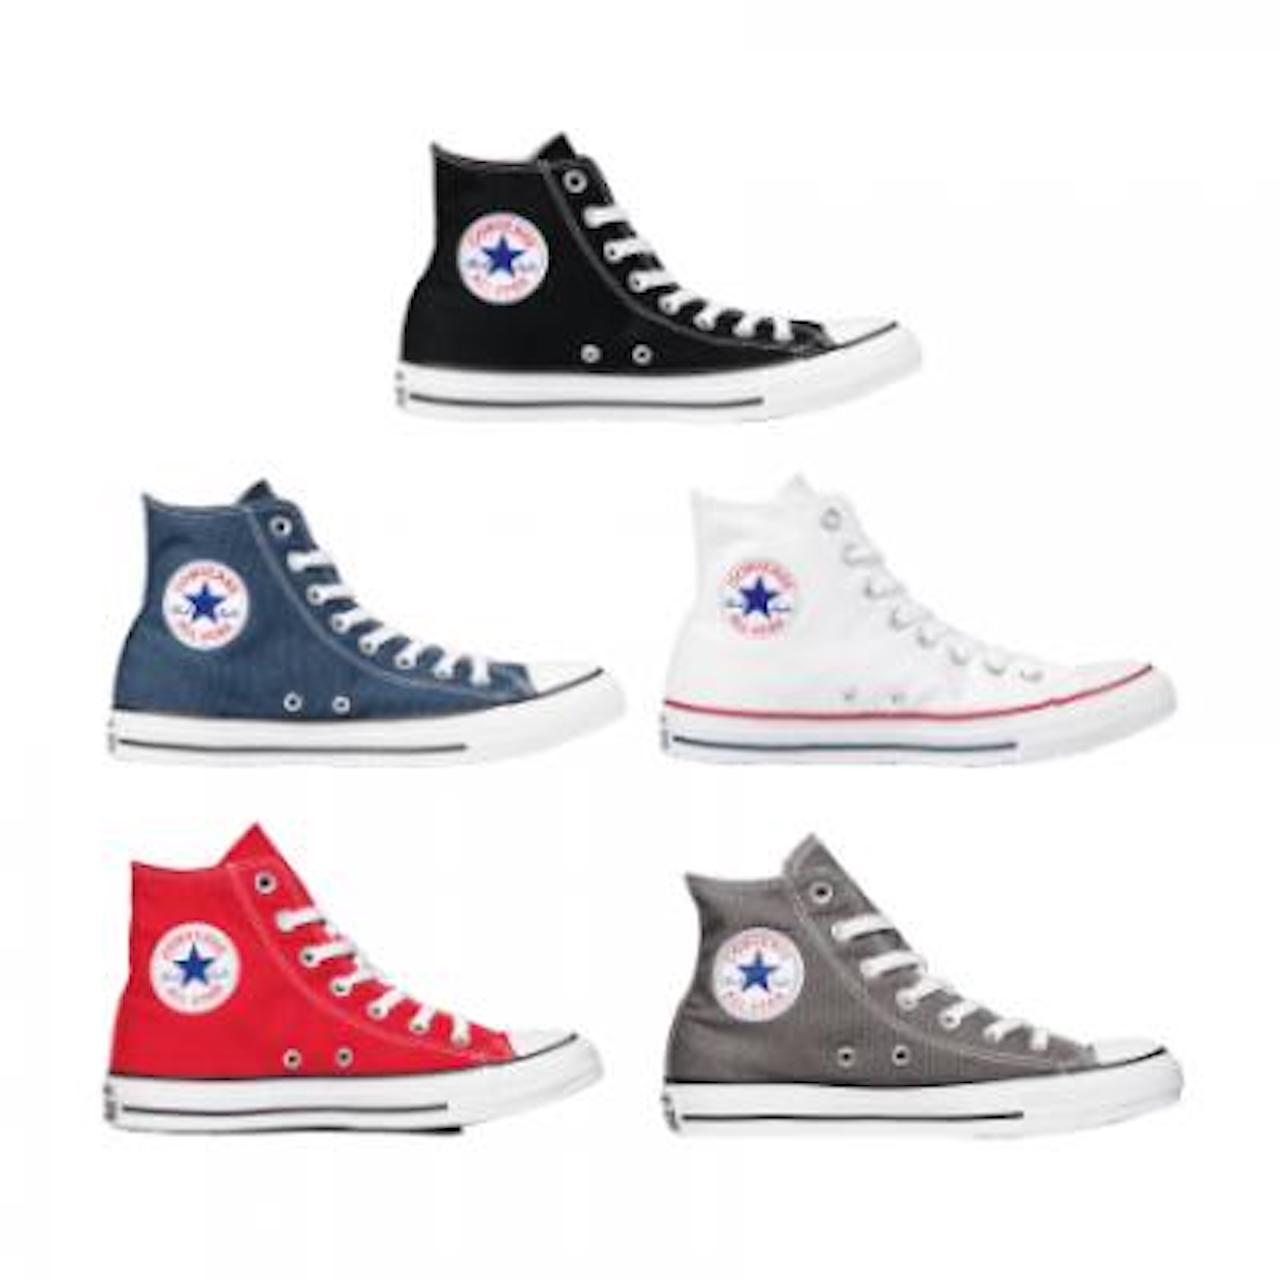 Converse Branded shoes wholesale - Fashion - stock clothes deals in bulk of and European brands